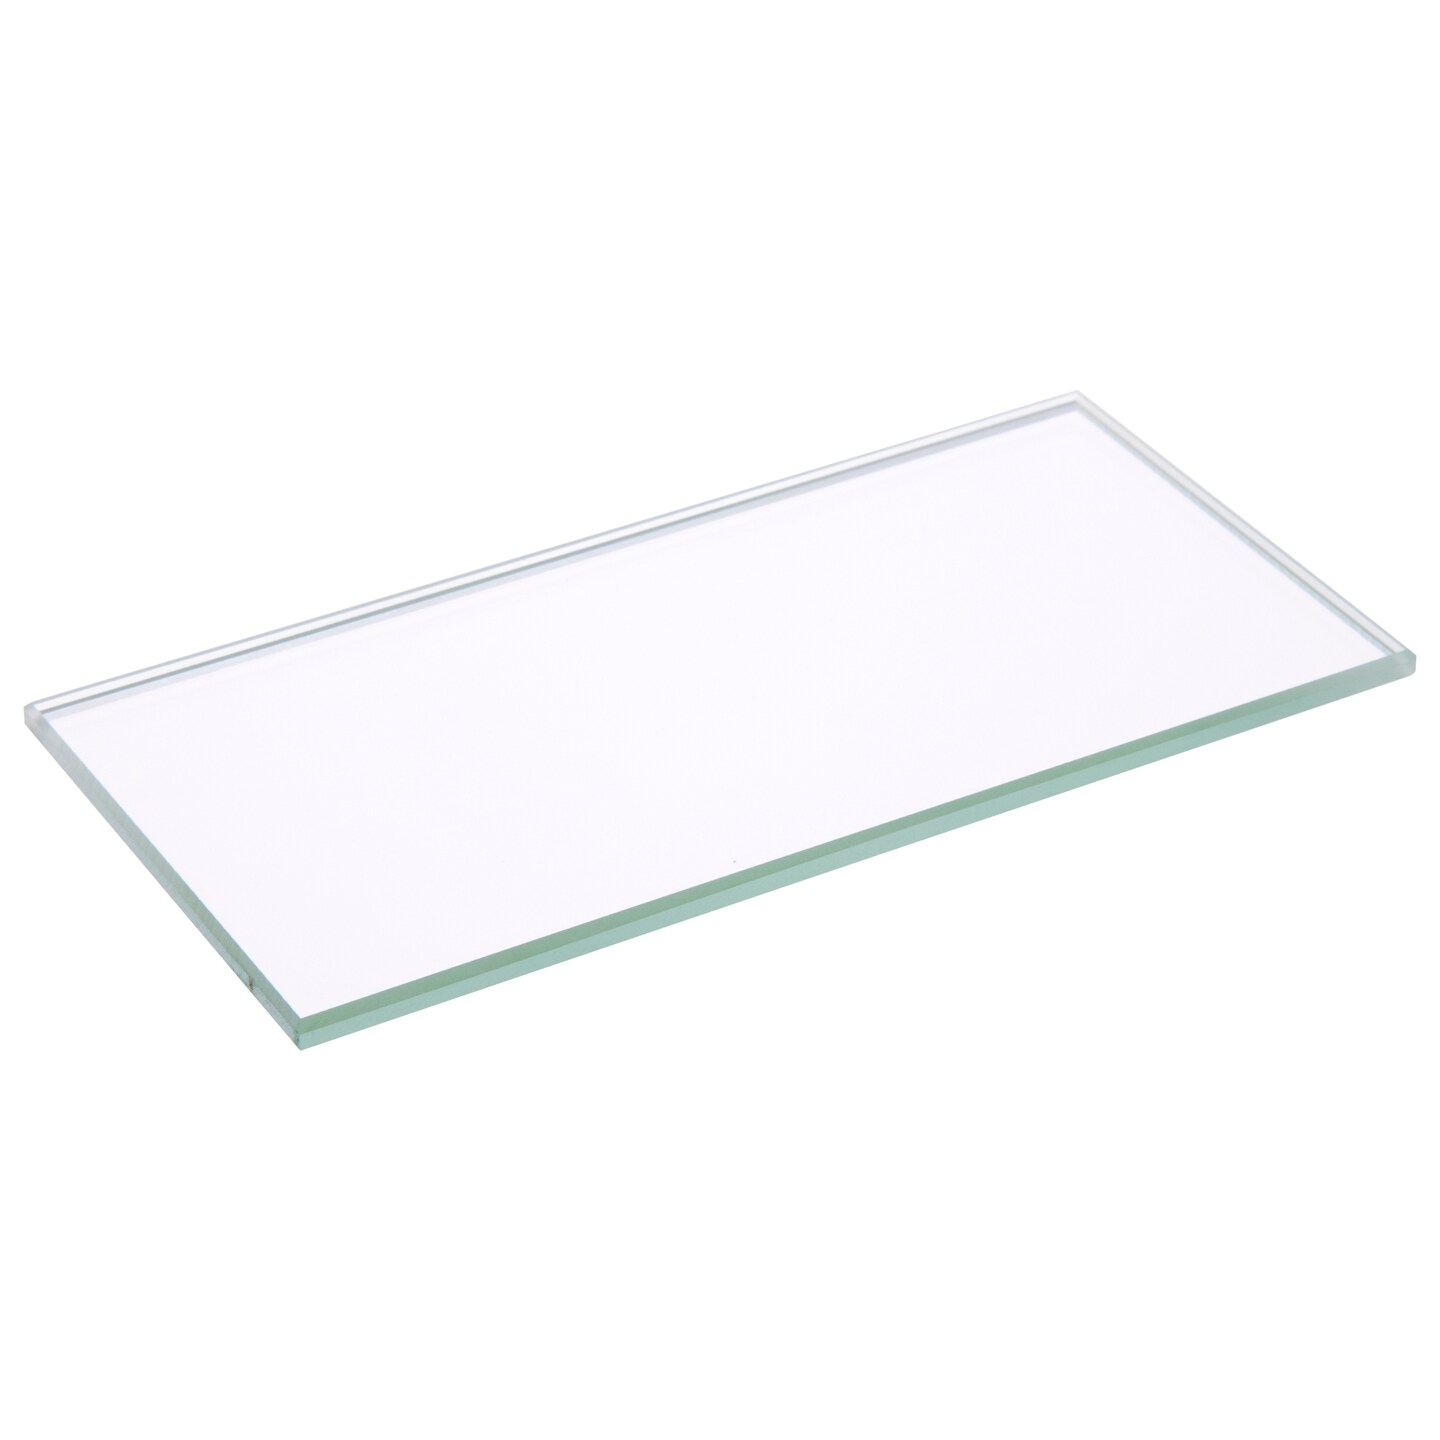 Plymor Rectangle 3mm Non-Beveled Glass Mirror, 2 inch x 4 inch